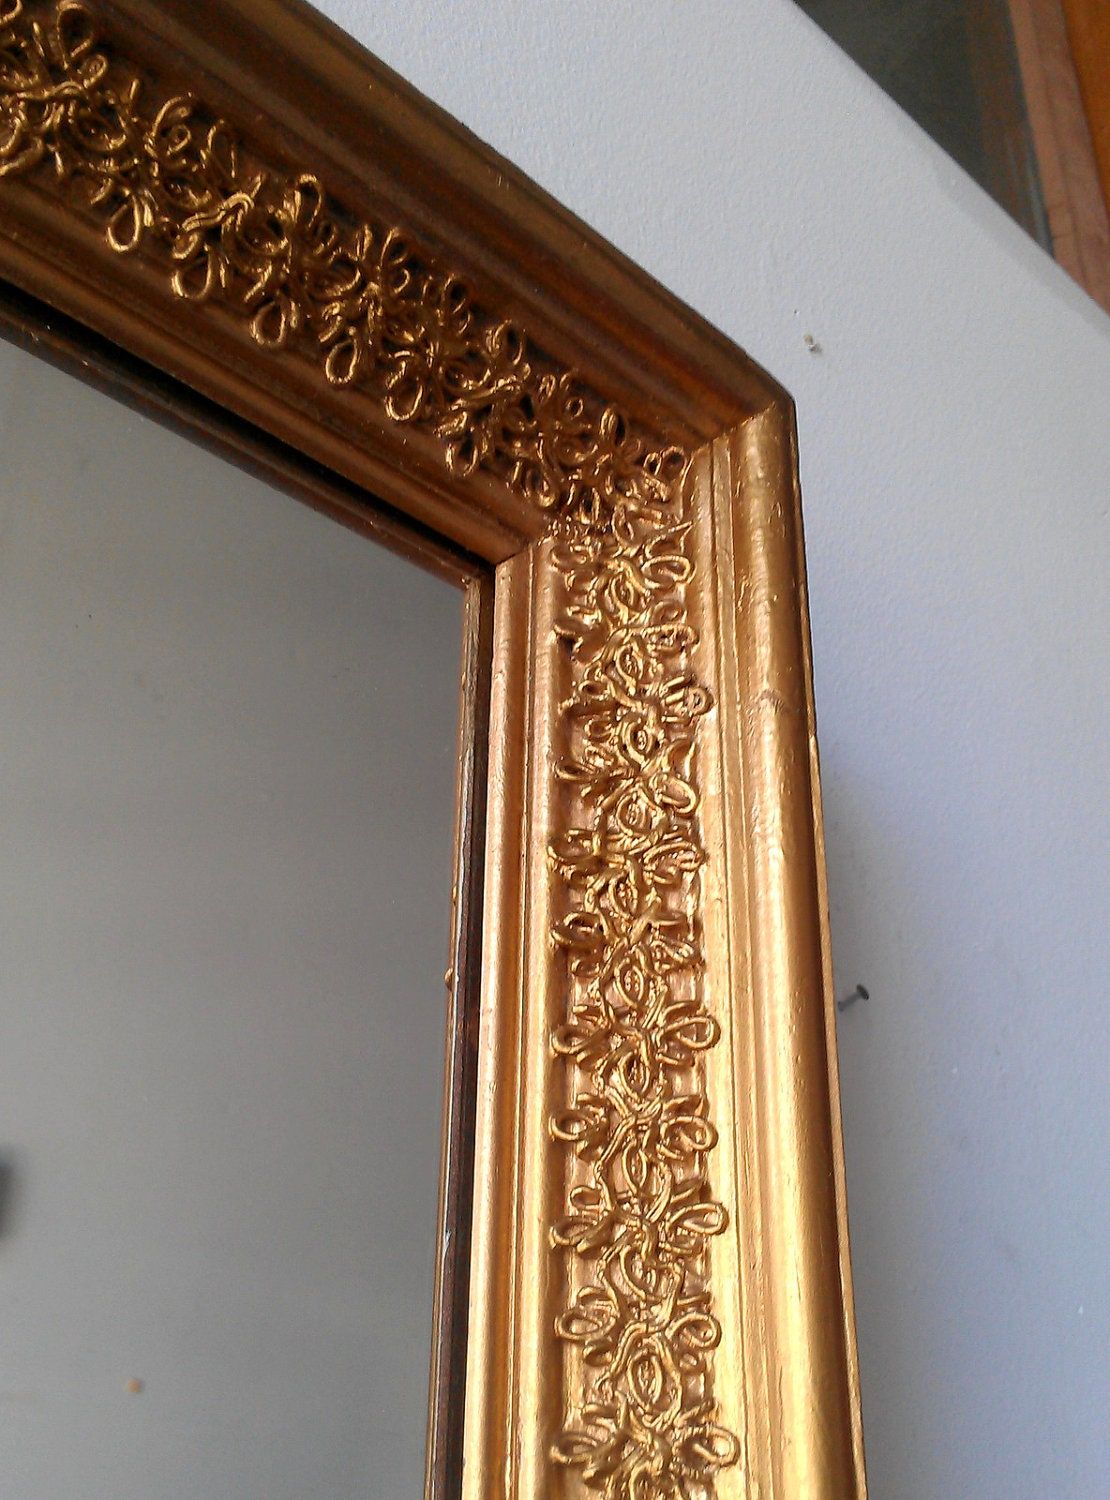 Large Gold Wall Mirror In Vintage Wood Frame 2519 Inches Inside Antique Gold Scallop Wall Mirrors (View 10 of 15)